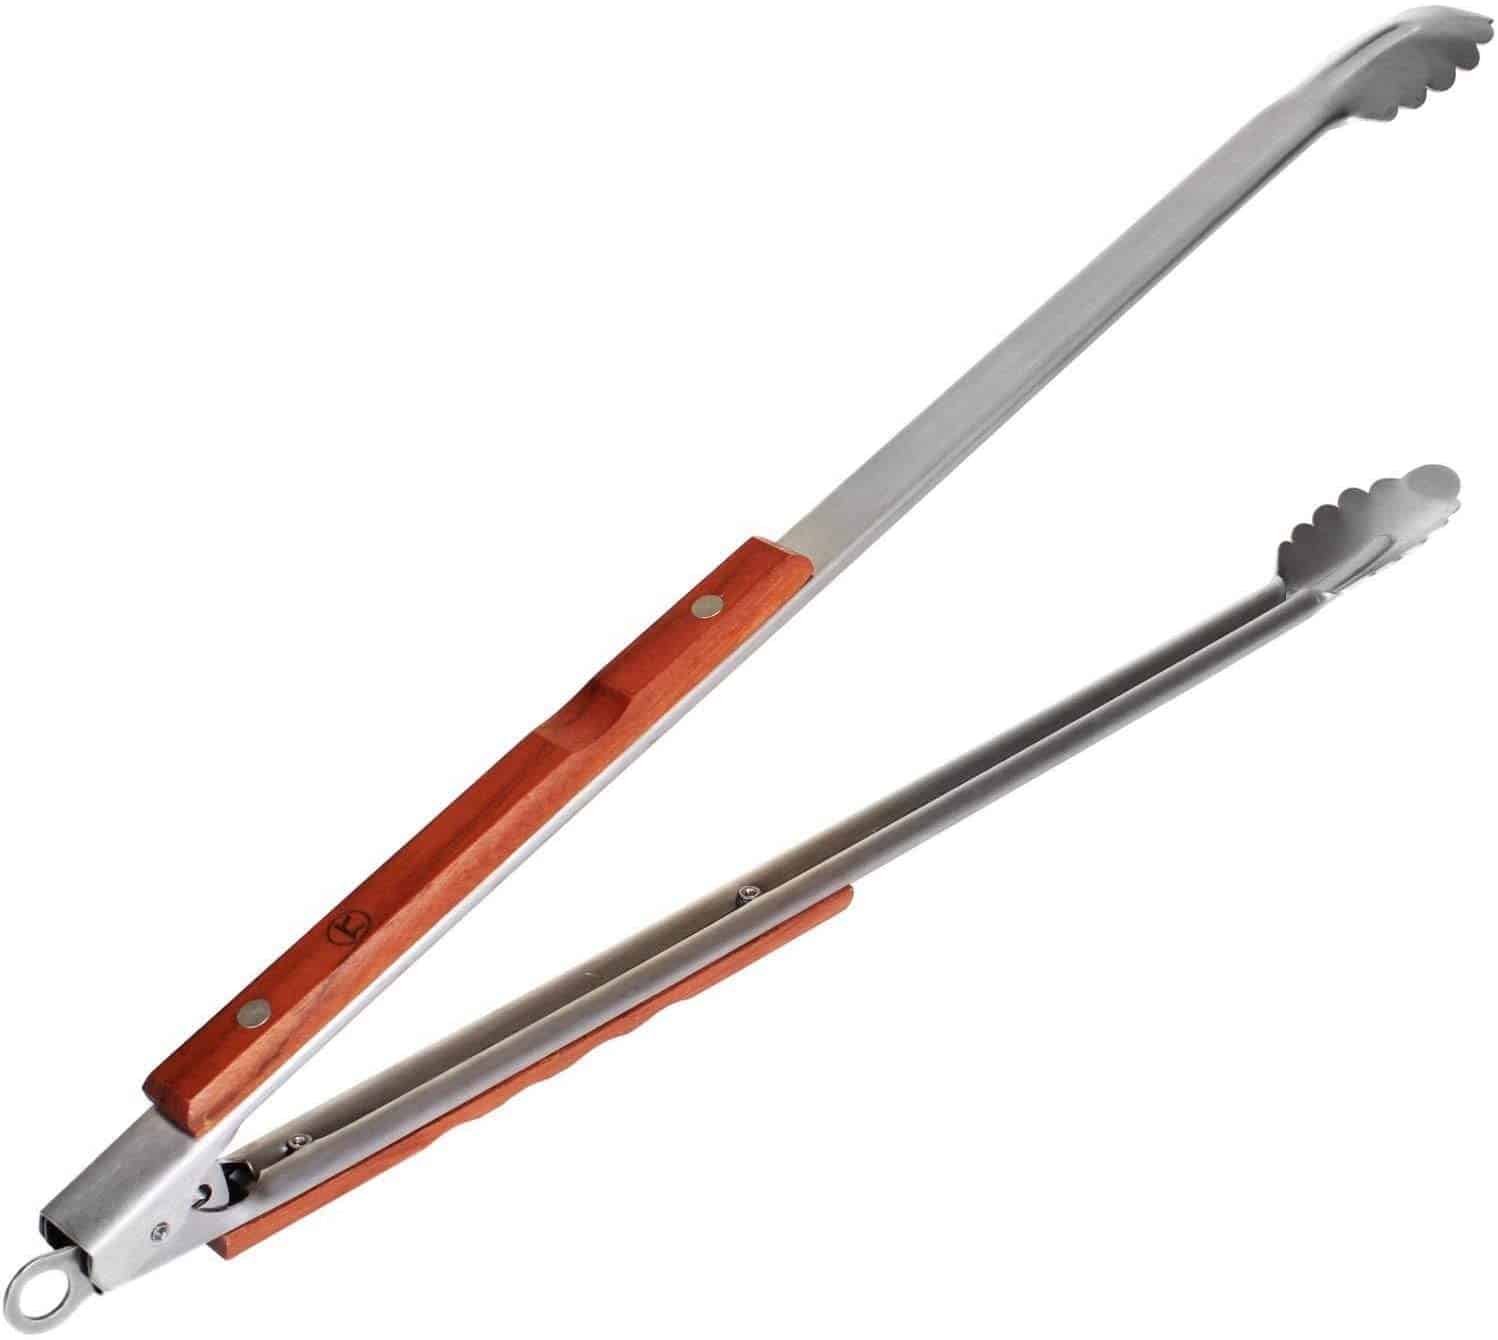 Best extra long grill tongs & best for ribs- Outset QB22 Locking